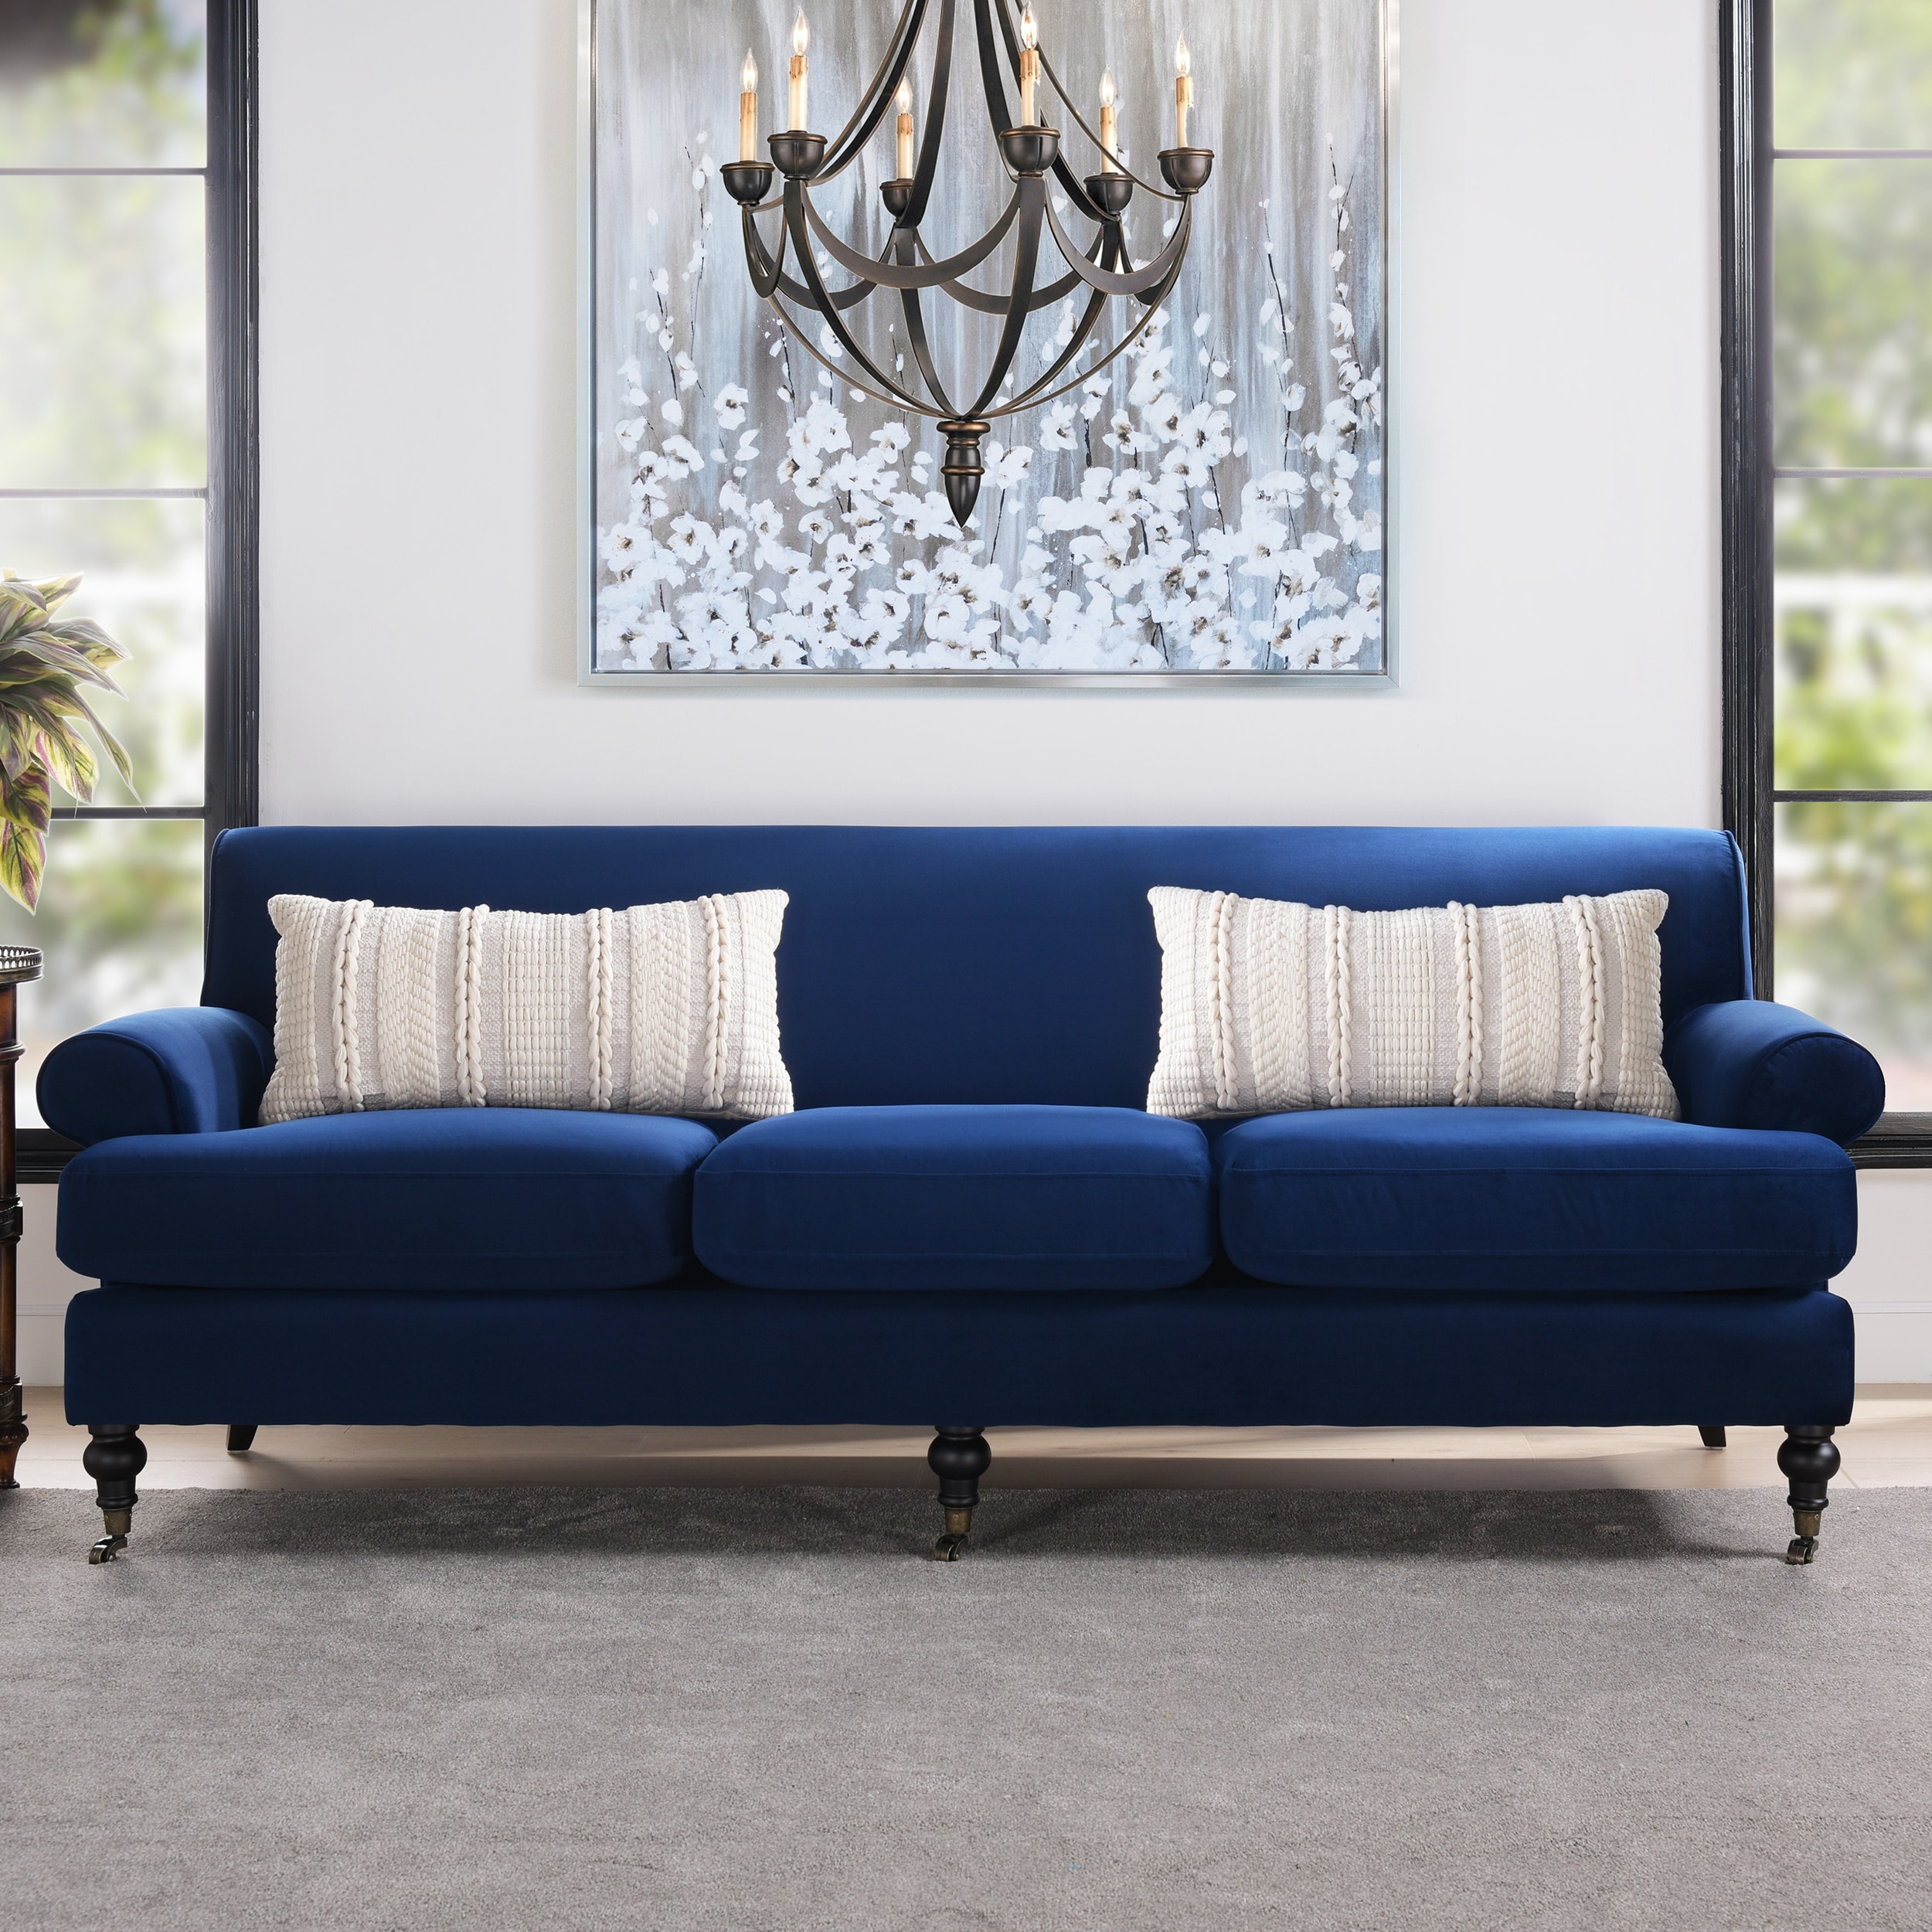 thee onstabiel Opknappen Jennifer Taylor Home Alana Midcentury Navy Blue Velvet Sofa in the Couches,  Sofas & Loveseats department at Lowes.com